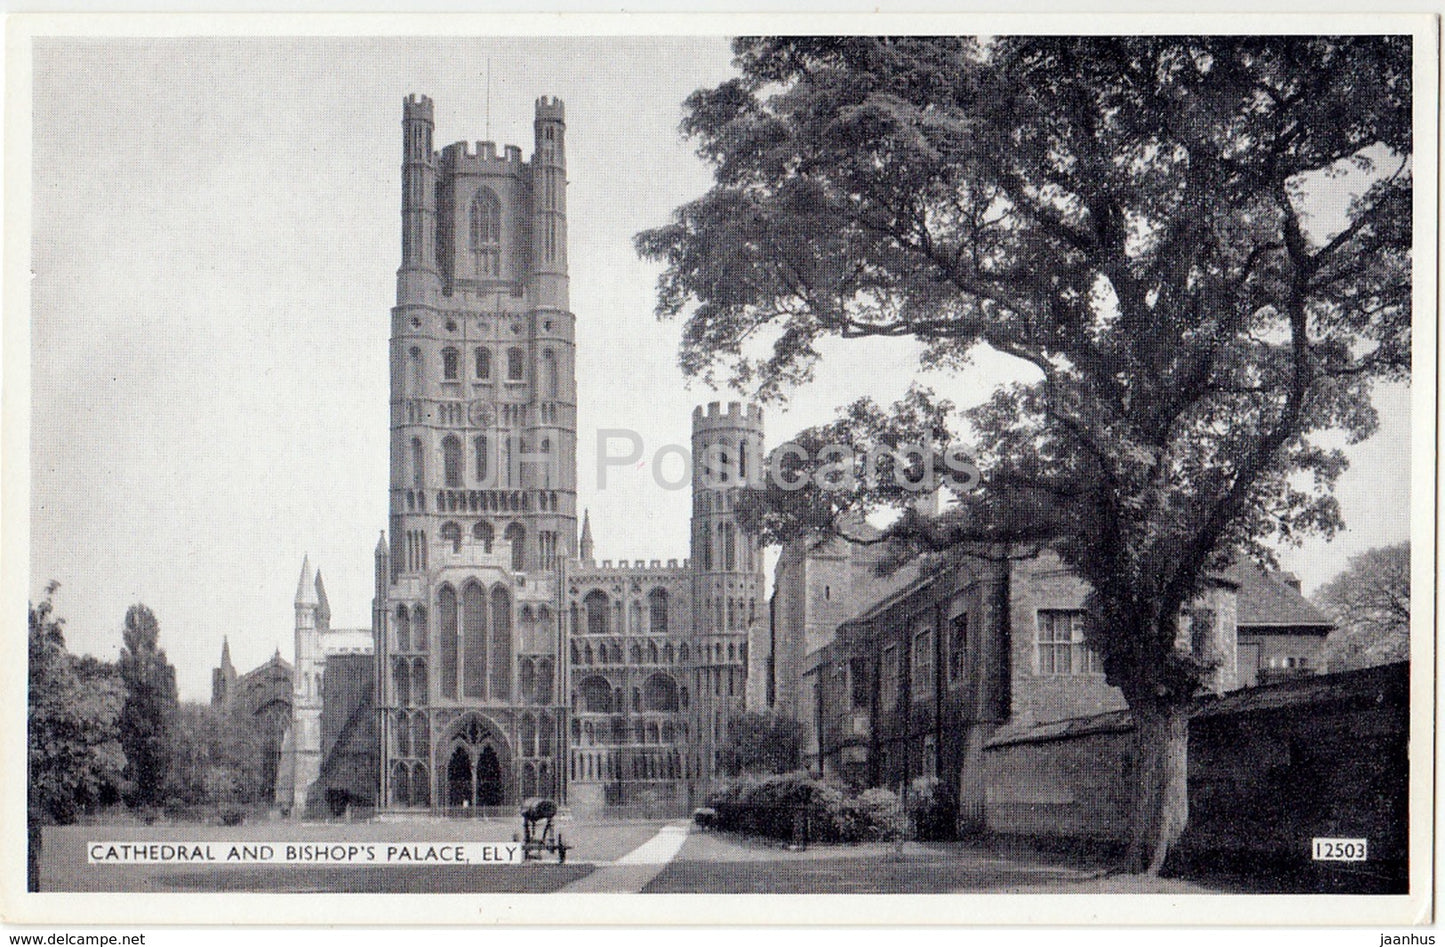 Ely - Cathedral and Bishop' s Palace - 12503 - 1961 - United Kingdom - England - used - JH Postcards